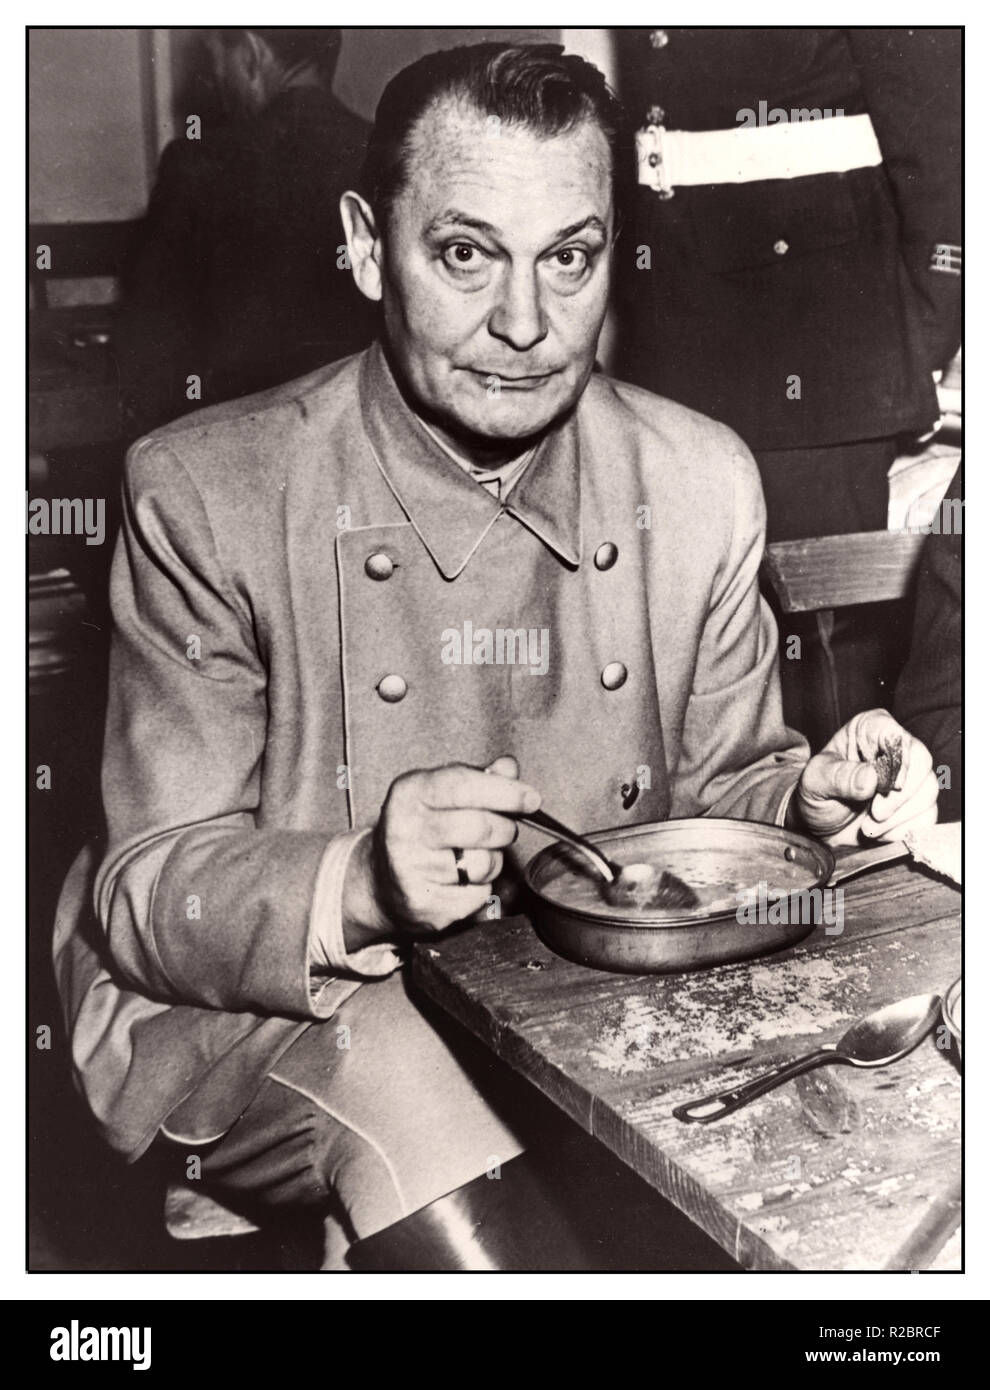 Hermann Goering Head of Nazi Luftwaffe Germany Third Reich's Field Marshal and commander of all German air forces during a meal break at The Nuremberg trials in October/November 1945. He committed suicide in his cell after his conviction and death sentence by International Military Tribunal at the Nuremberg war crimes trials for crimes against humanity November 1946. Stock Photo